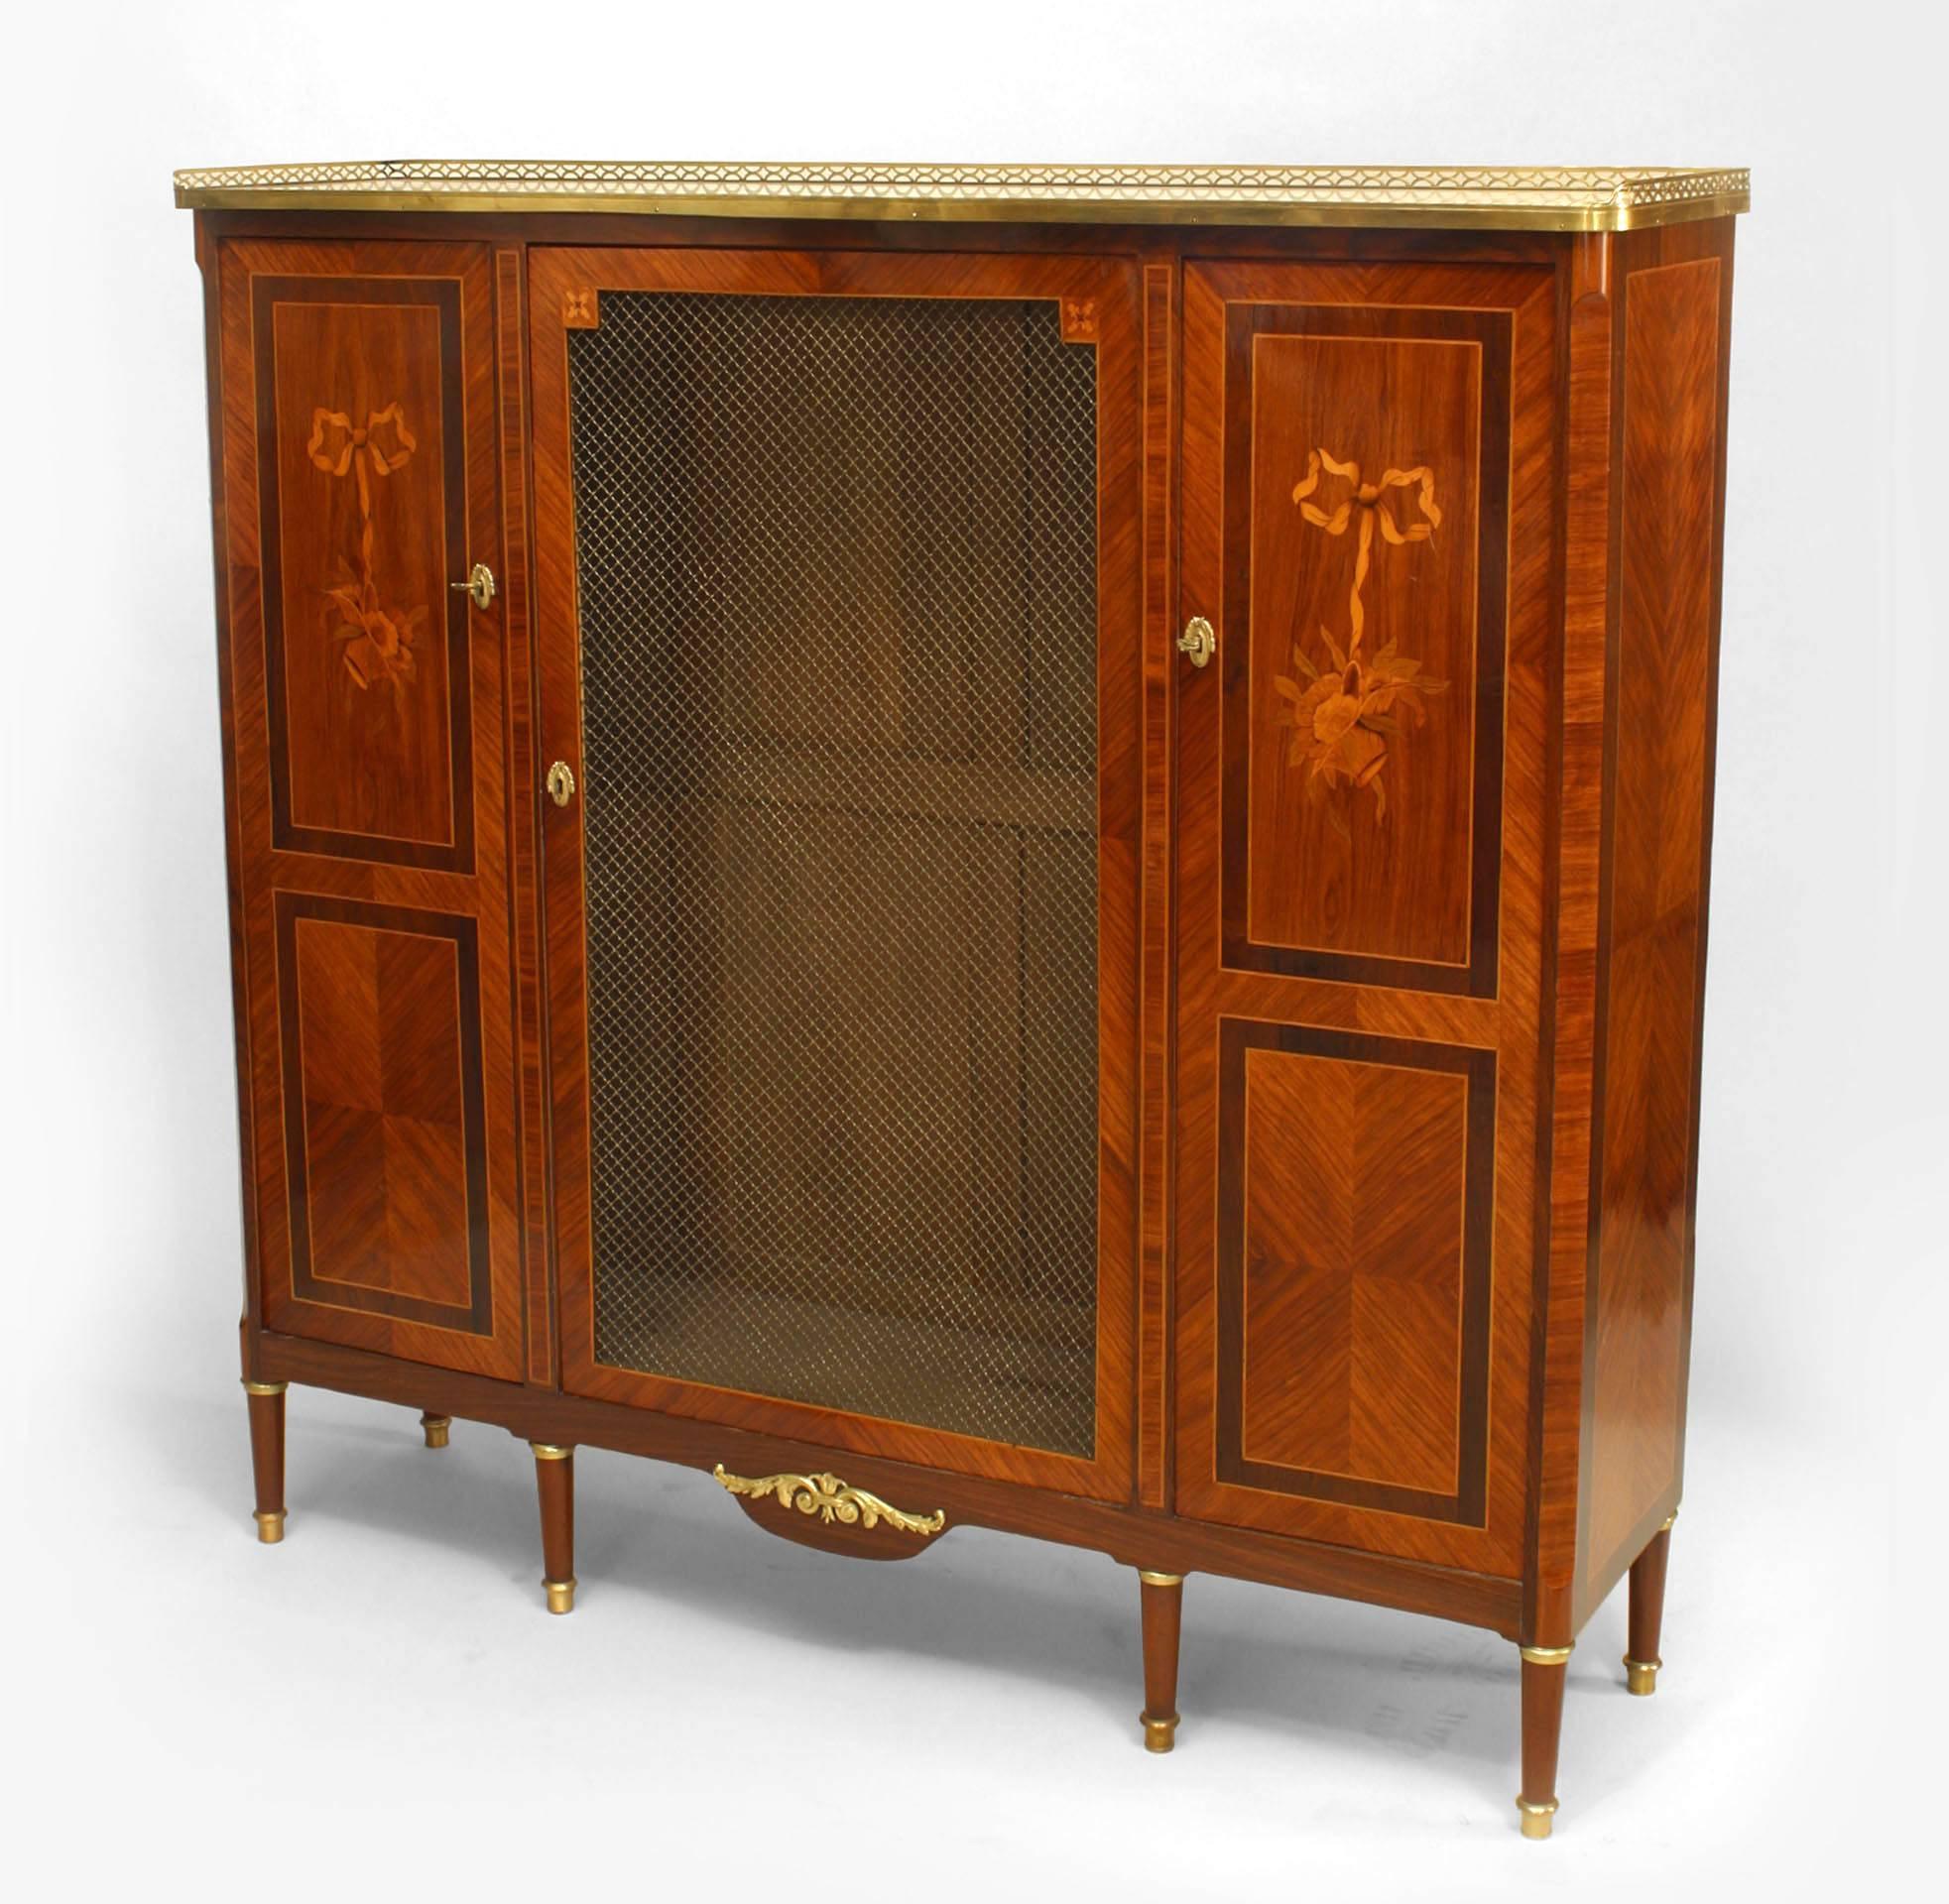 French Louis XVI kingwood and inlaid veneer high cabinet with three doors (grill center door) with a white marble top with gallery and gilt bronze trim.
 